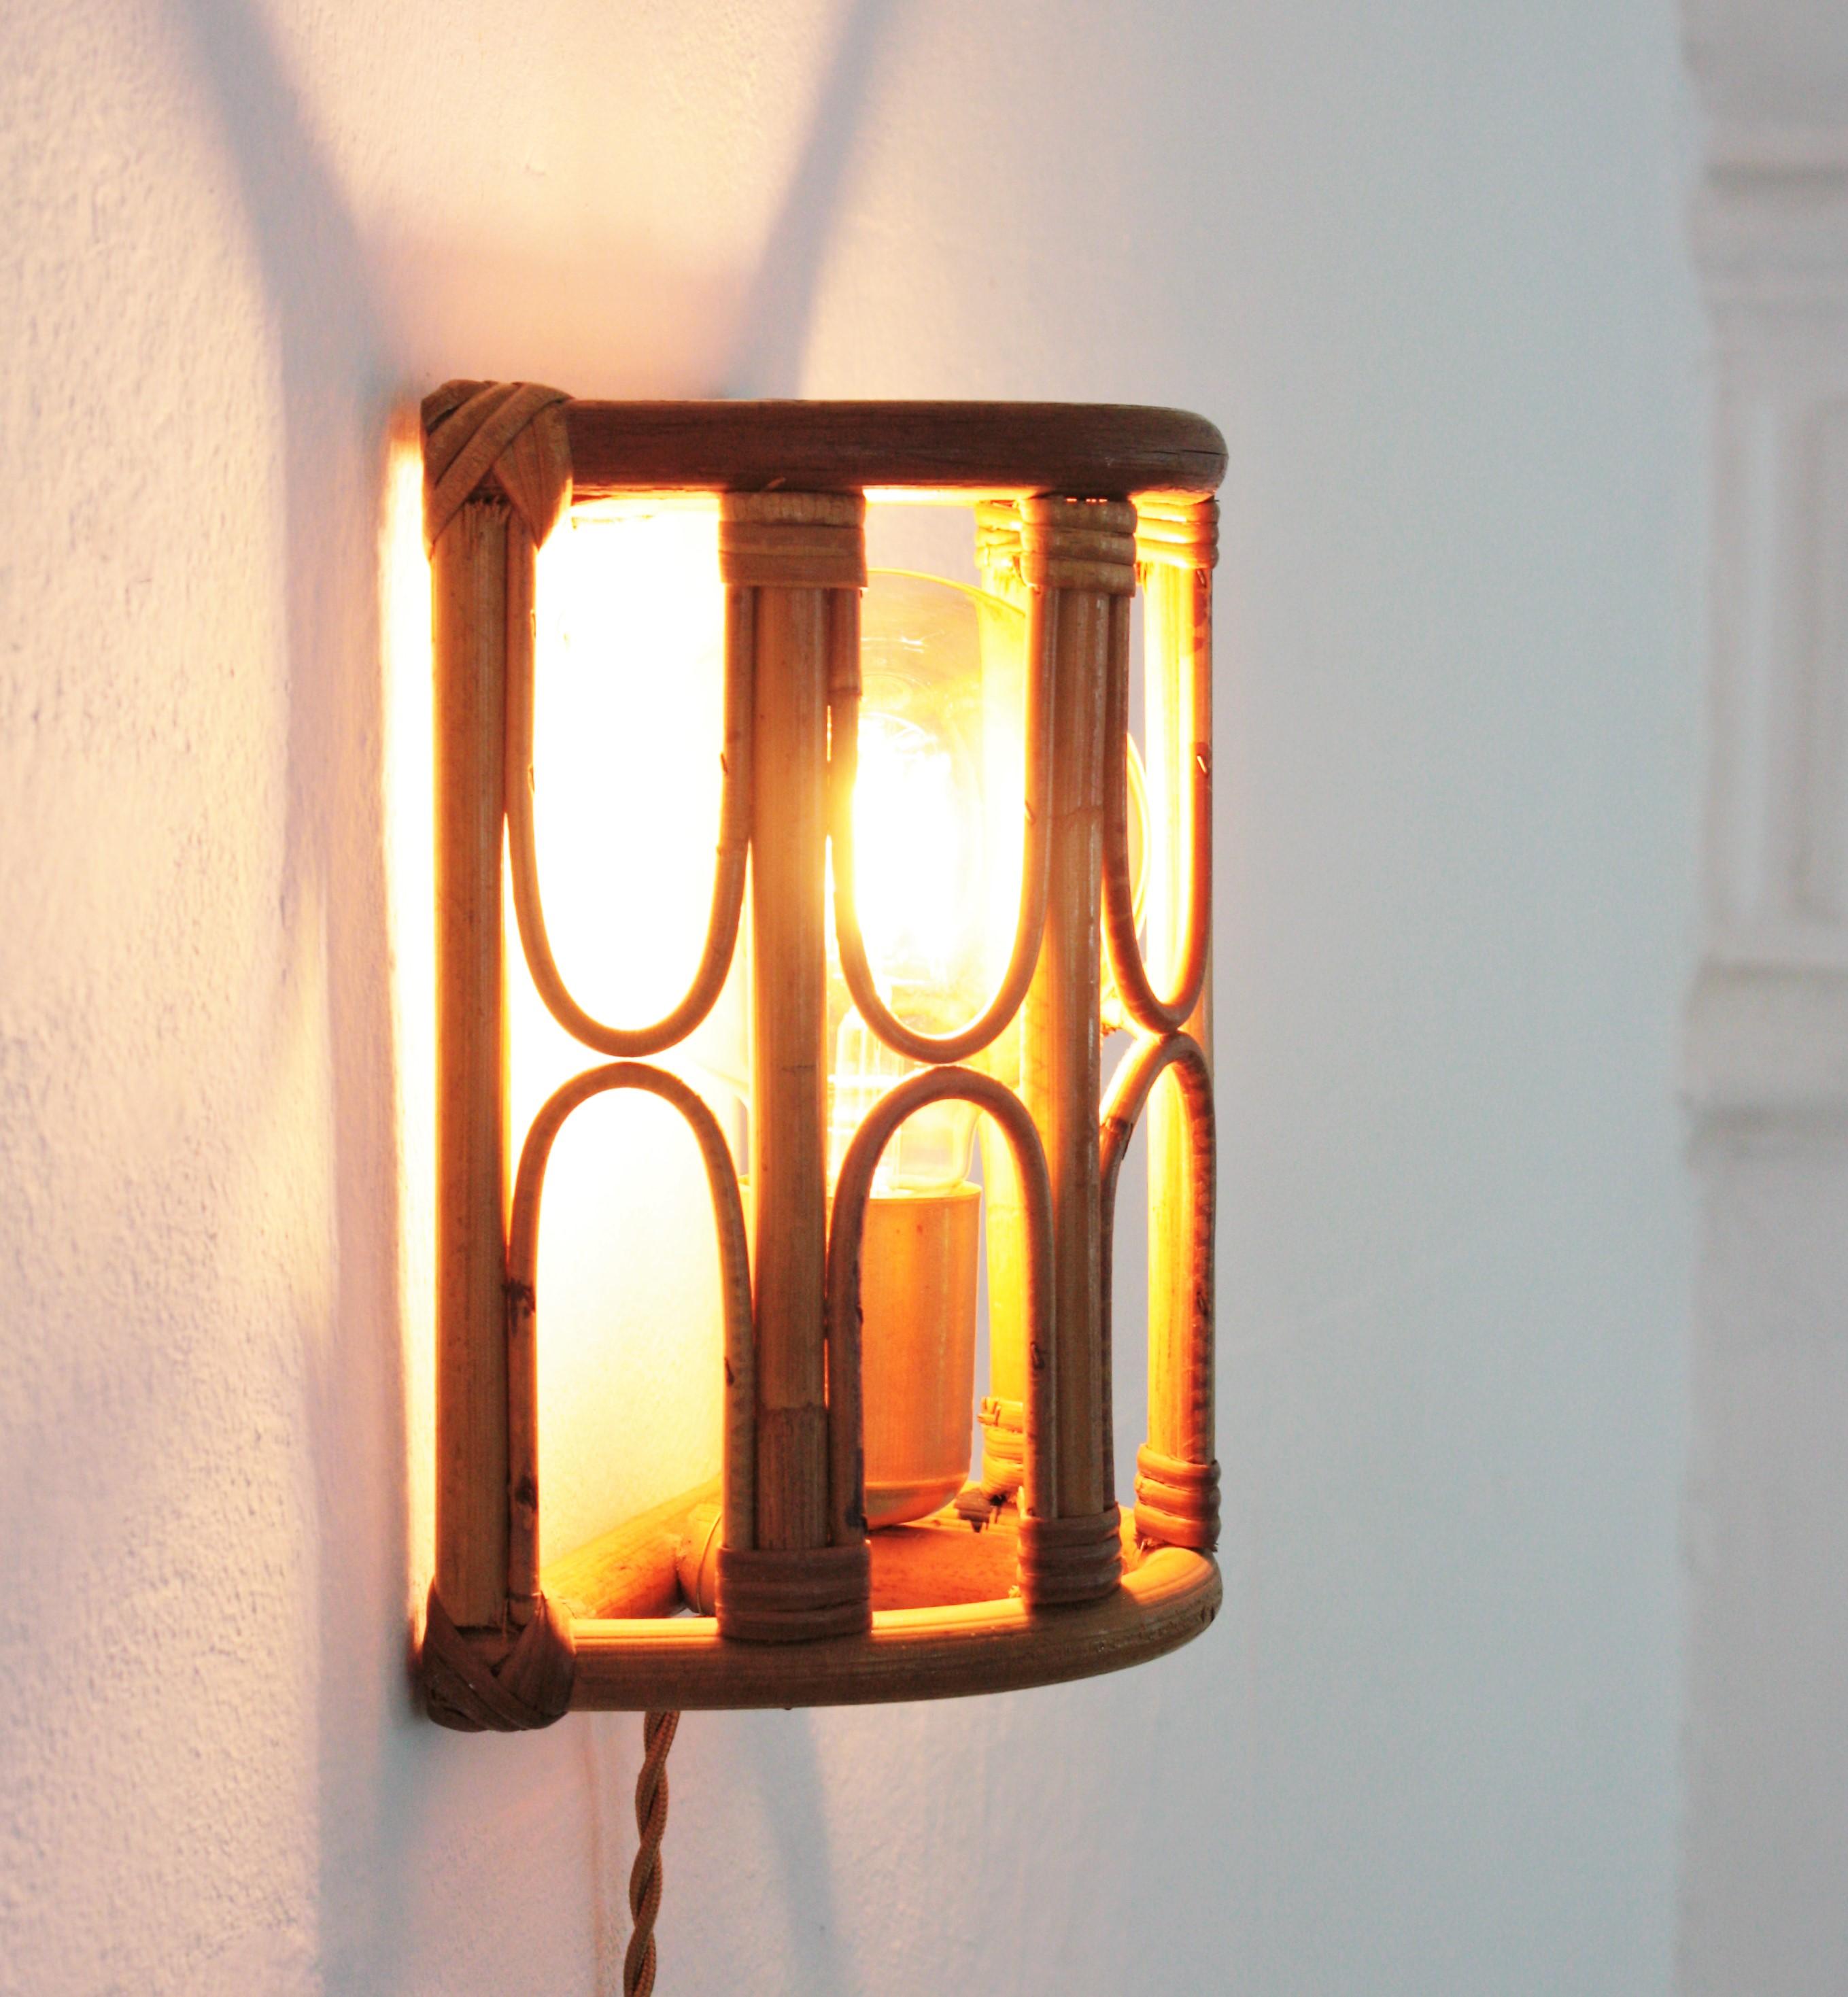 Rattan Bamboo Italian Modernist Wall Sconce, 1960s For Sale 6